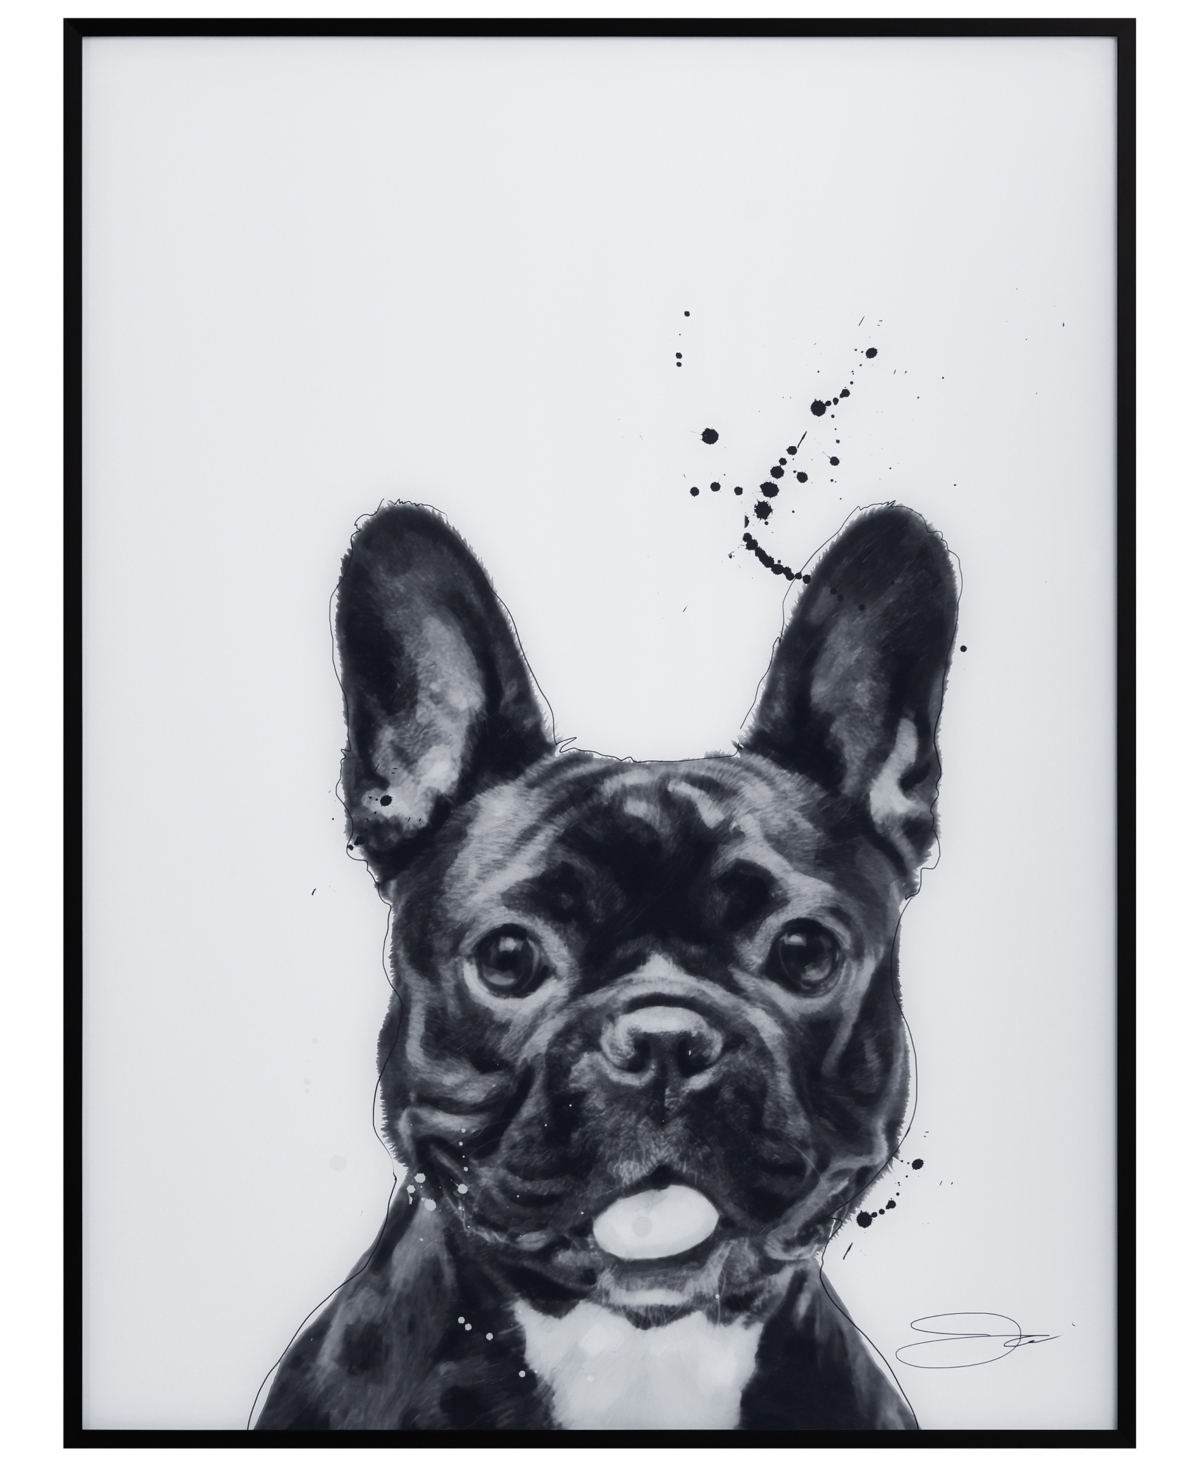 Empire Art Direct "french Bulldog" Pet Paintings On Printed Glass Encased With A Black Anodized Frame, 24" X 18" X 1" In Black And White